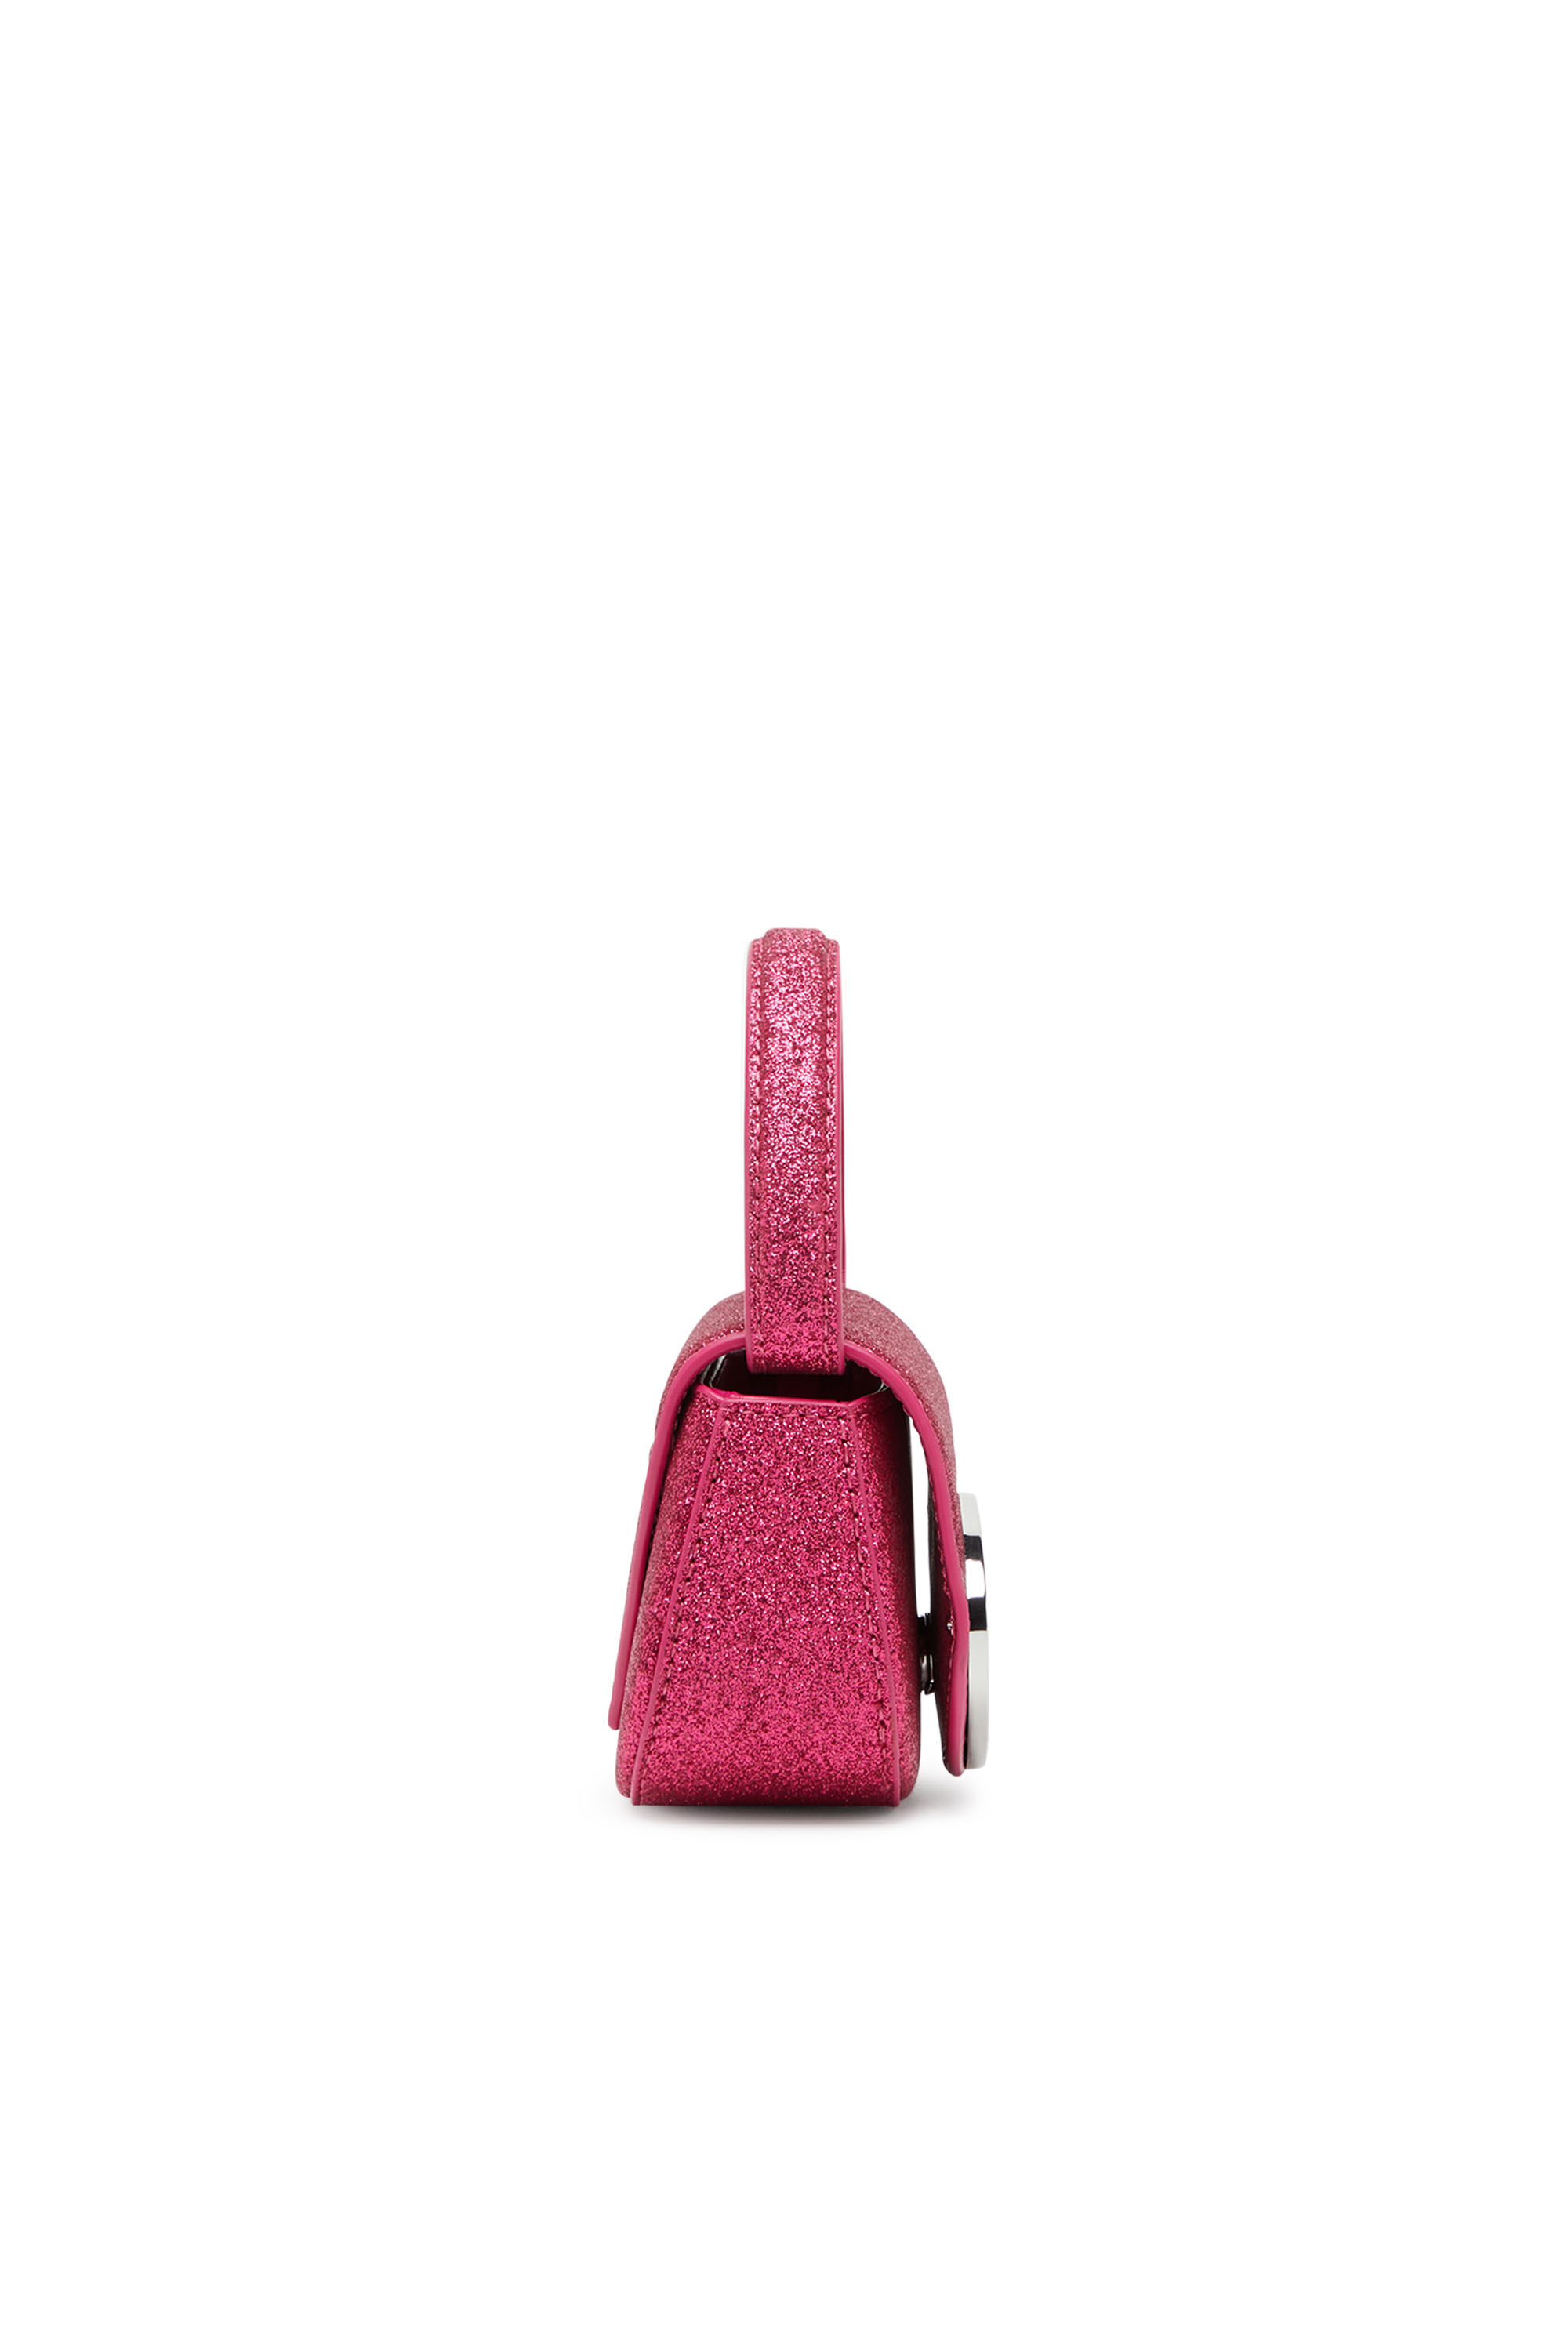 Diesel - 1DR XS, Woman 1DR XS-Iconic mini bag in glitter fabric in Pink - Image 4